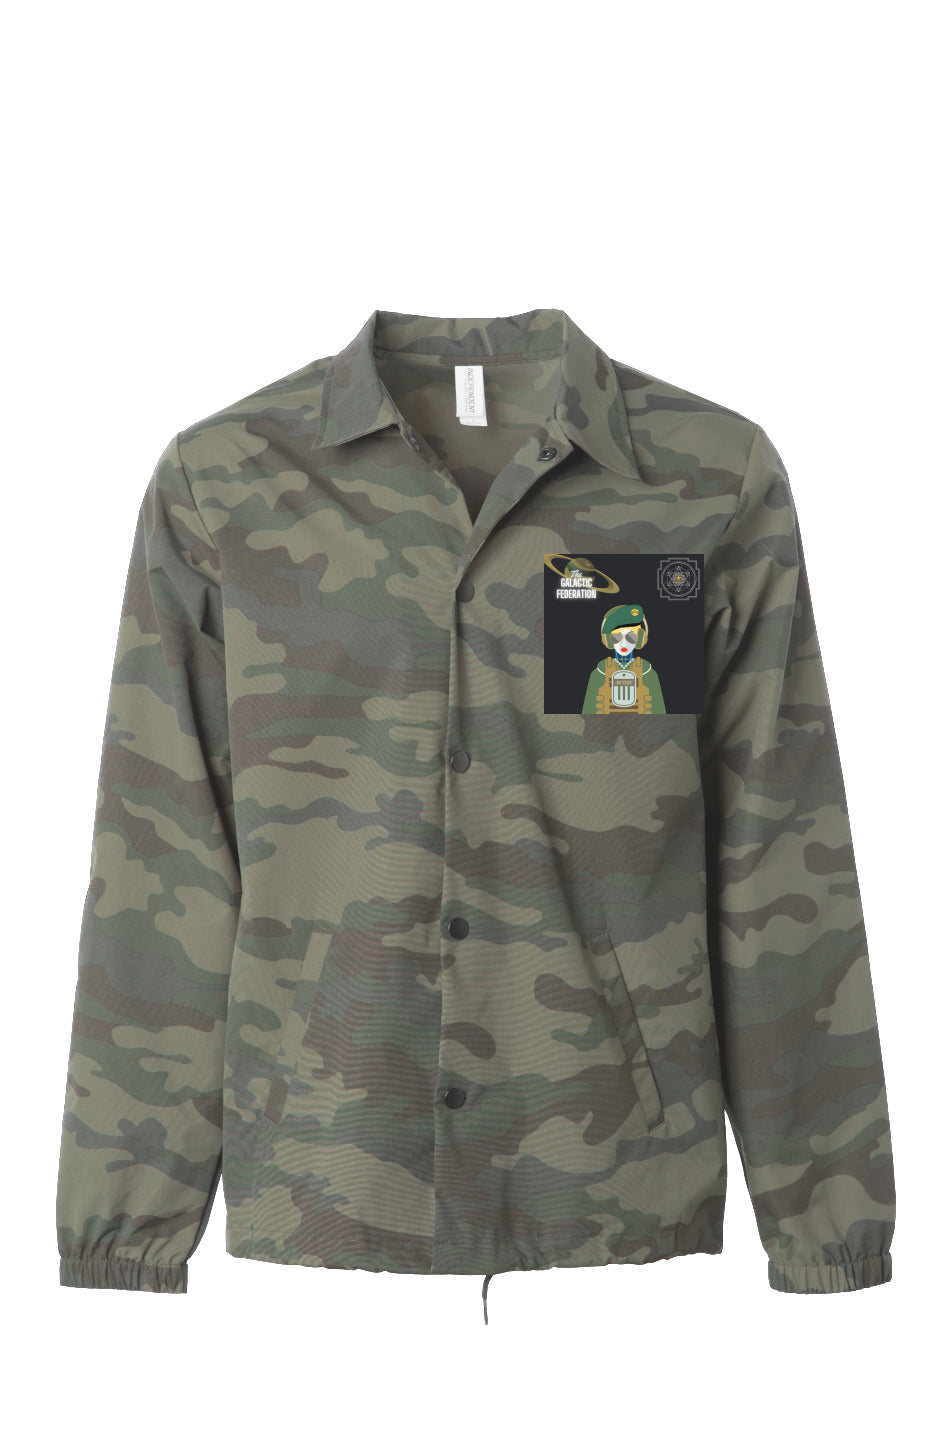 Bully-Proof NFT US Army Collection Water Resistant Windbreaker Coaches Jacket Camo